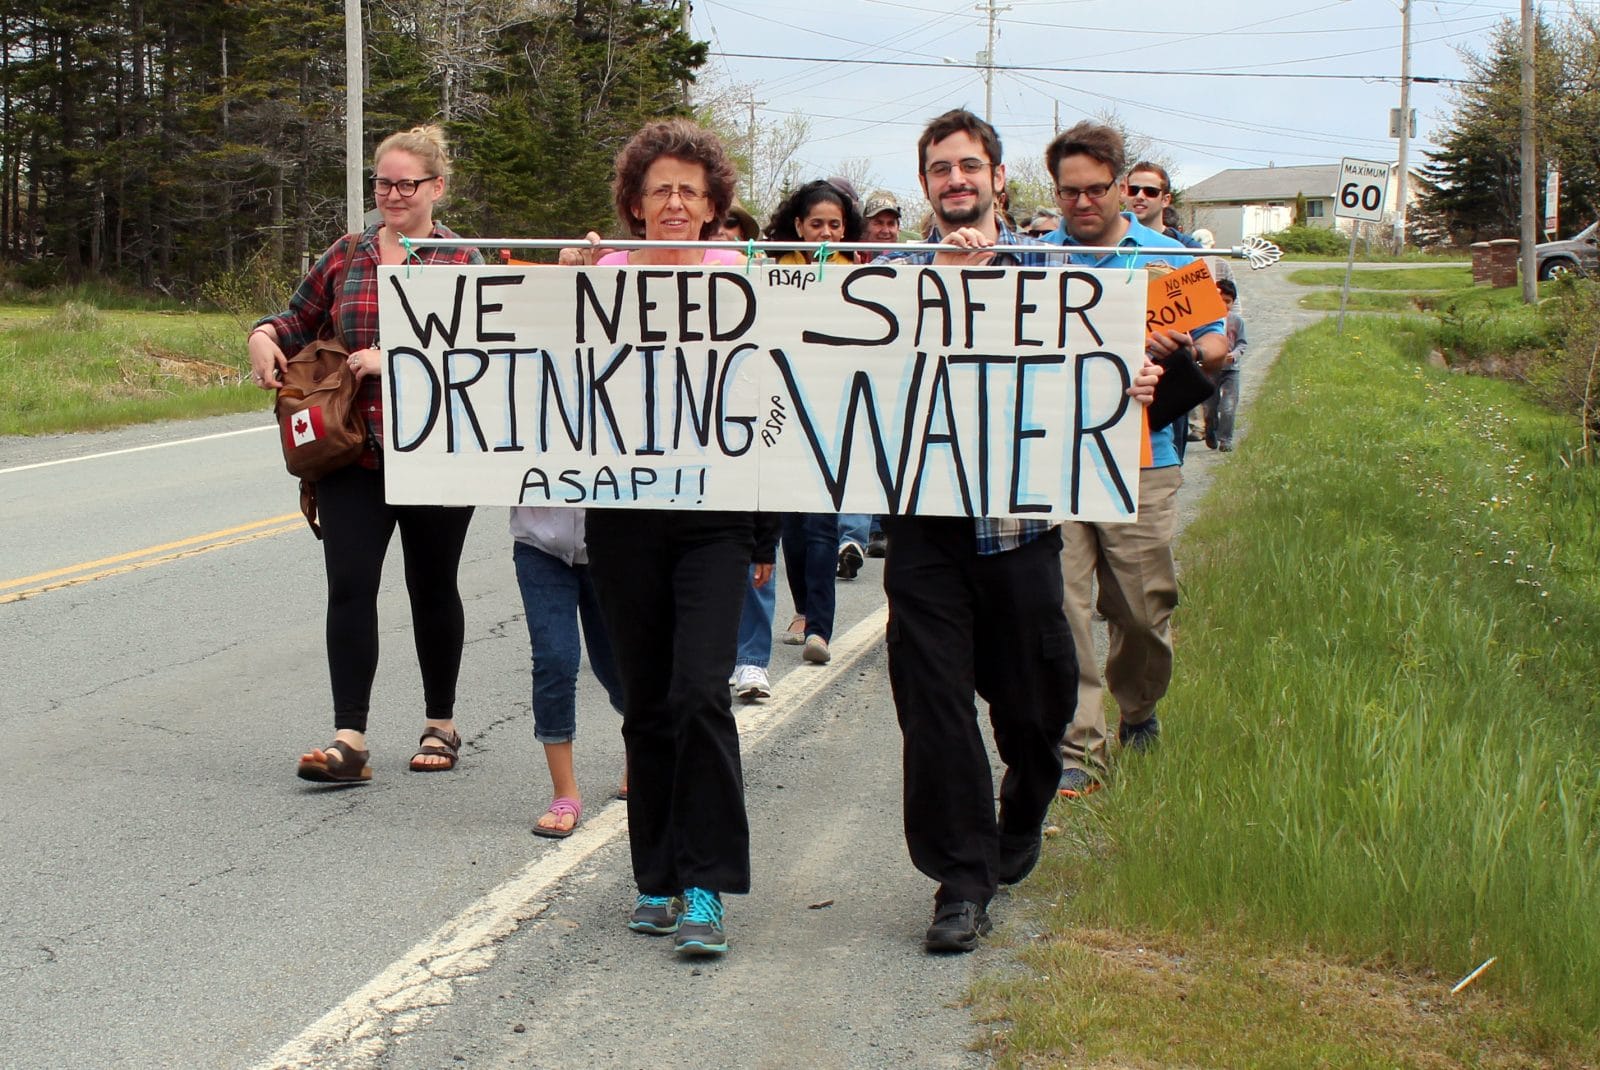 Protesters march along a road. 2 hold a banner that reads "We need safer drinking water ASAP"